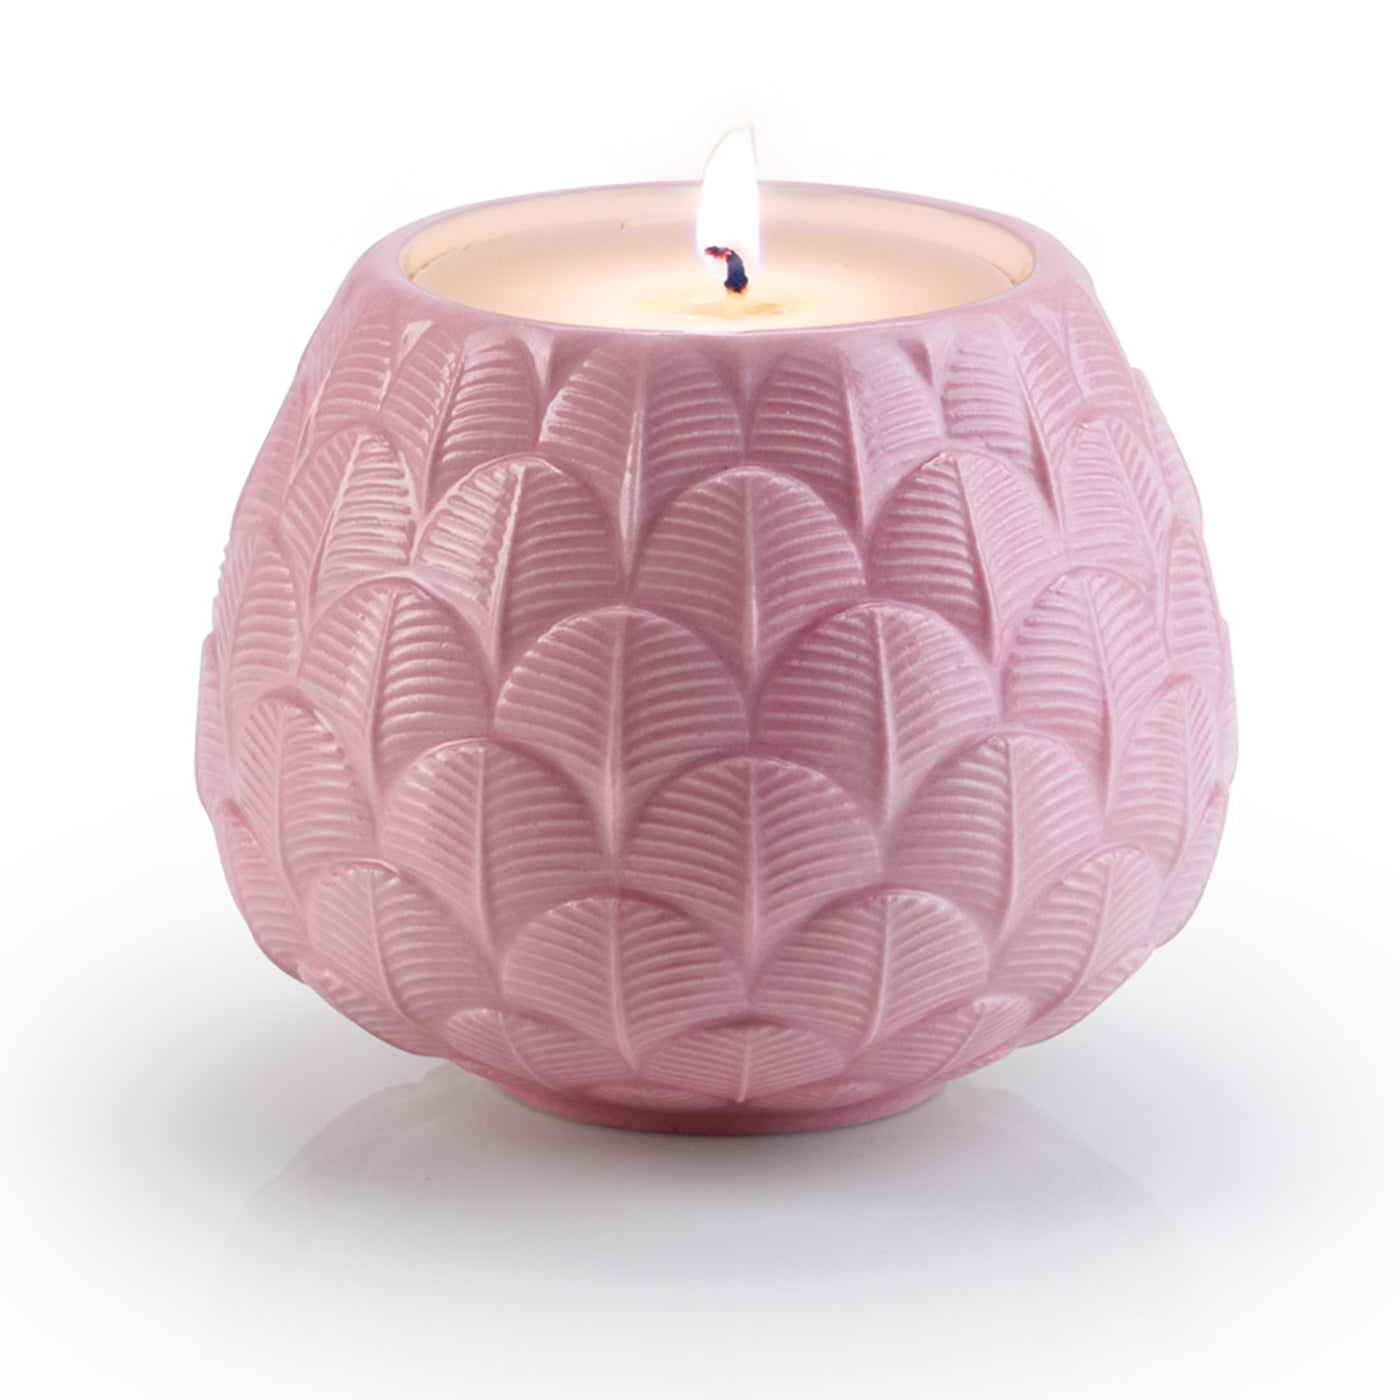 CHARLOTTE PEACOCK CANDLE COVER - PINK - Alternative view 1